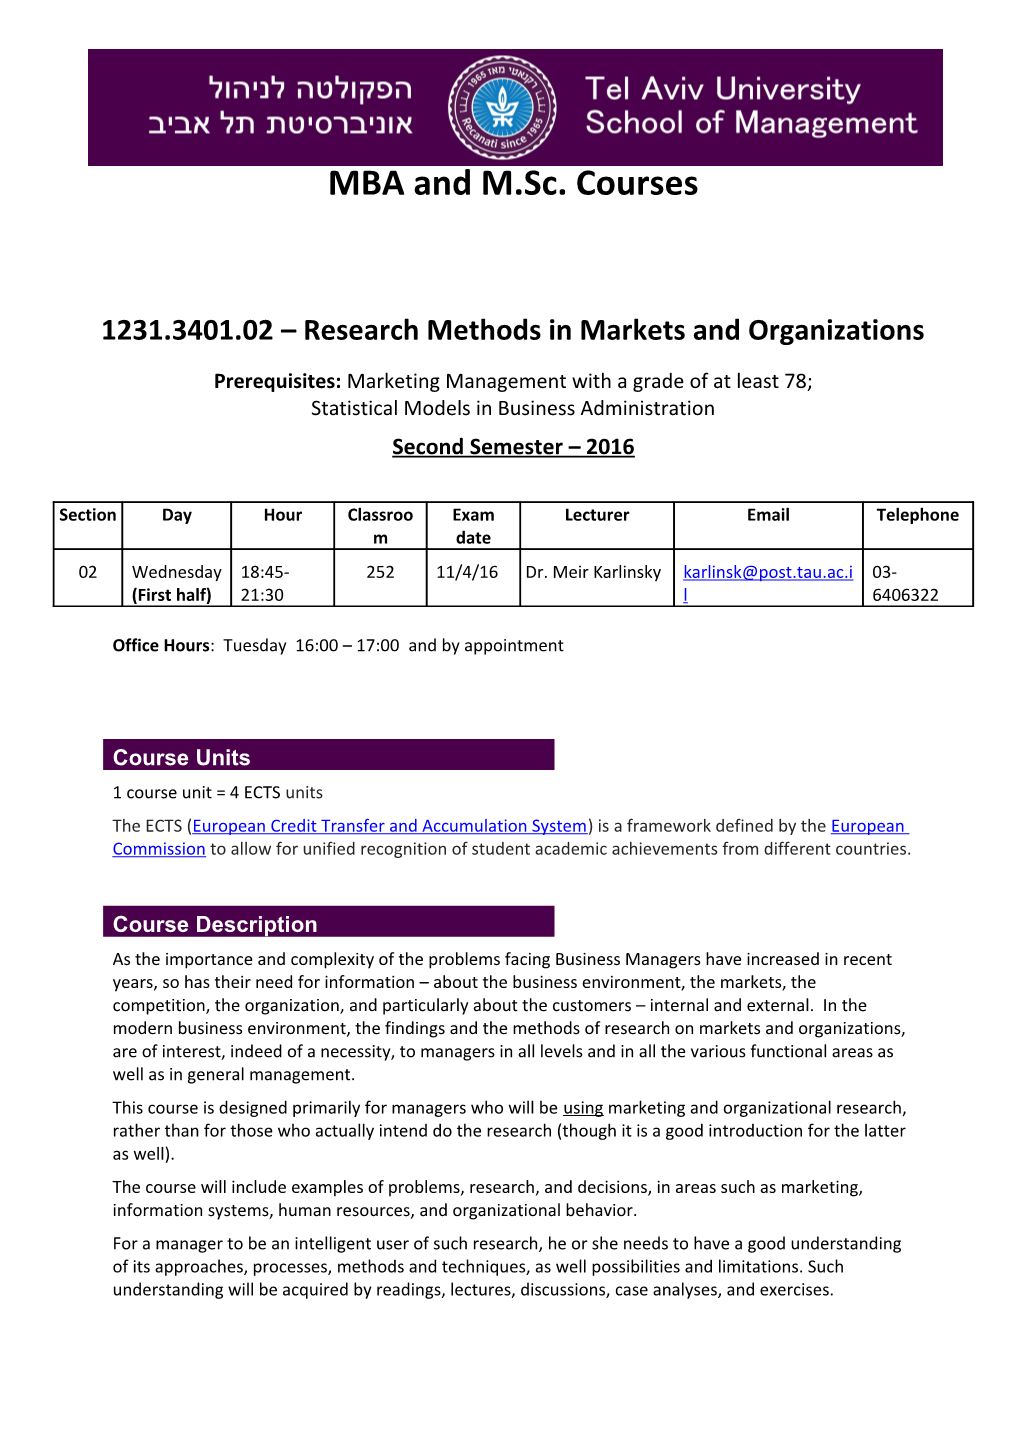 1231.3401.02 Research Methods in Markets and Organizations